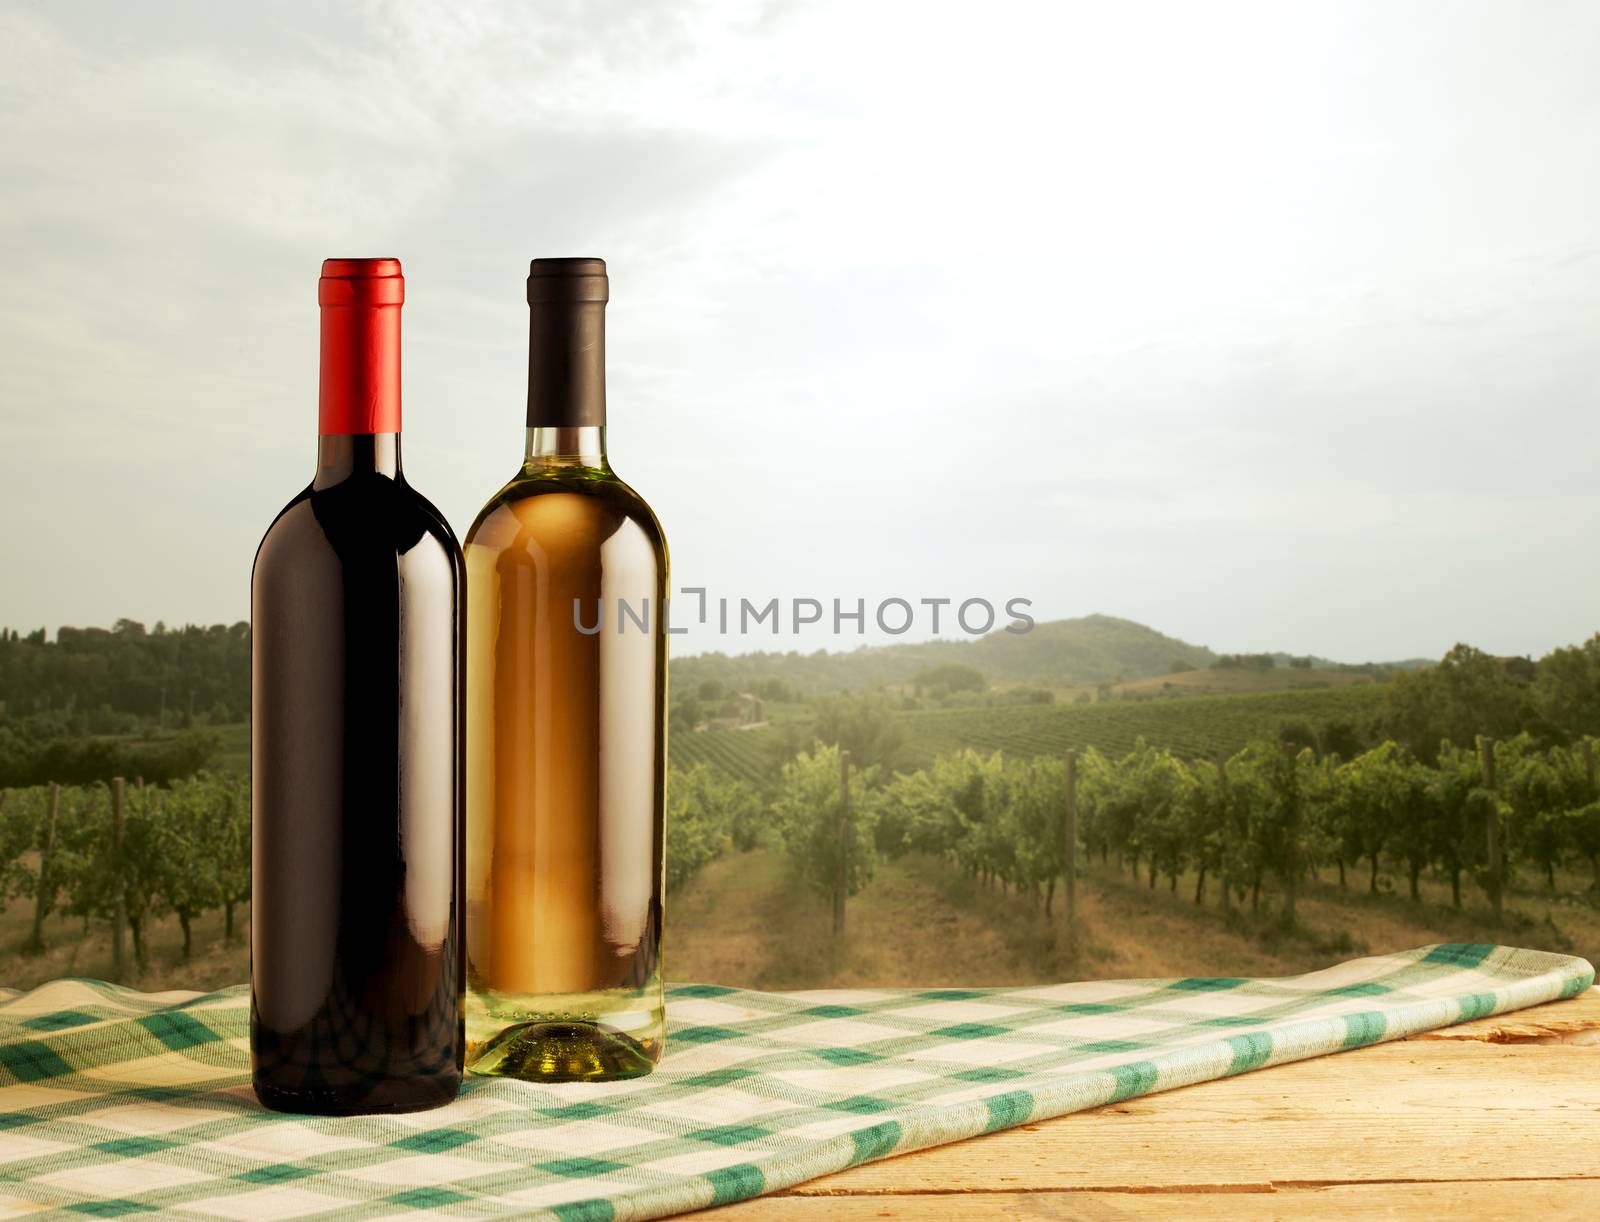 Red and white wine bottles standing on checked tablecloth and vineyard on background.